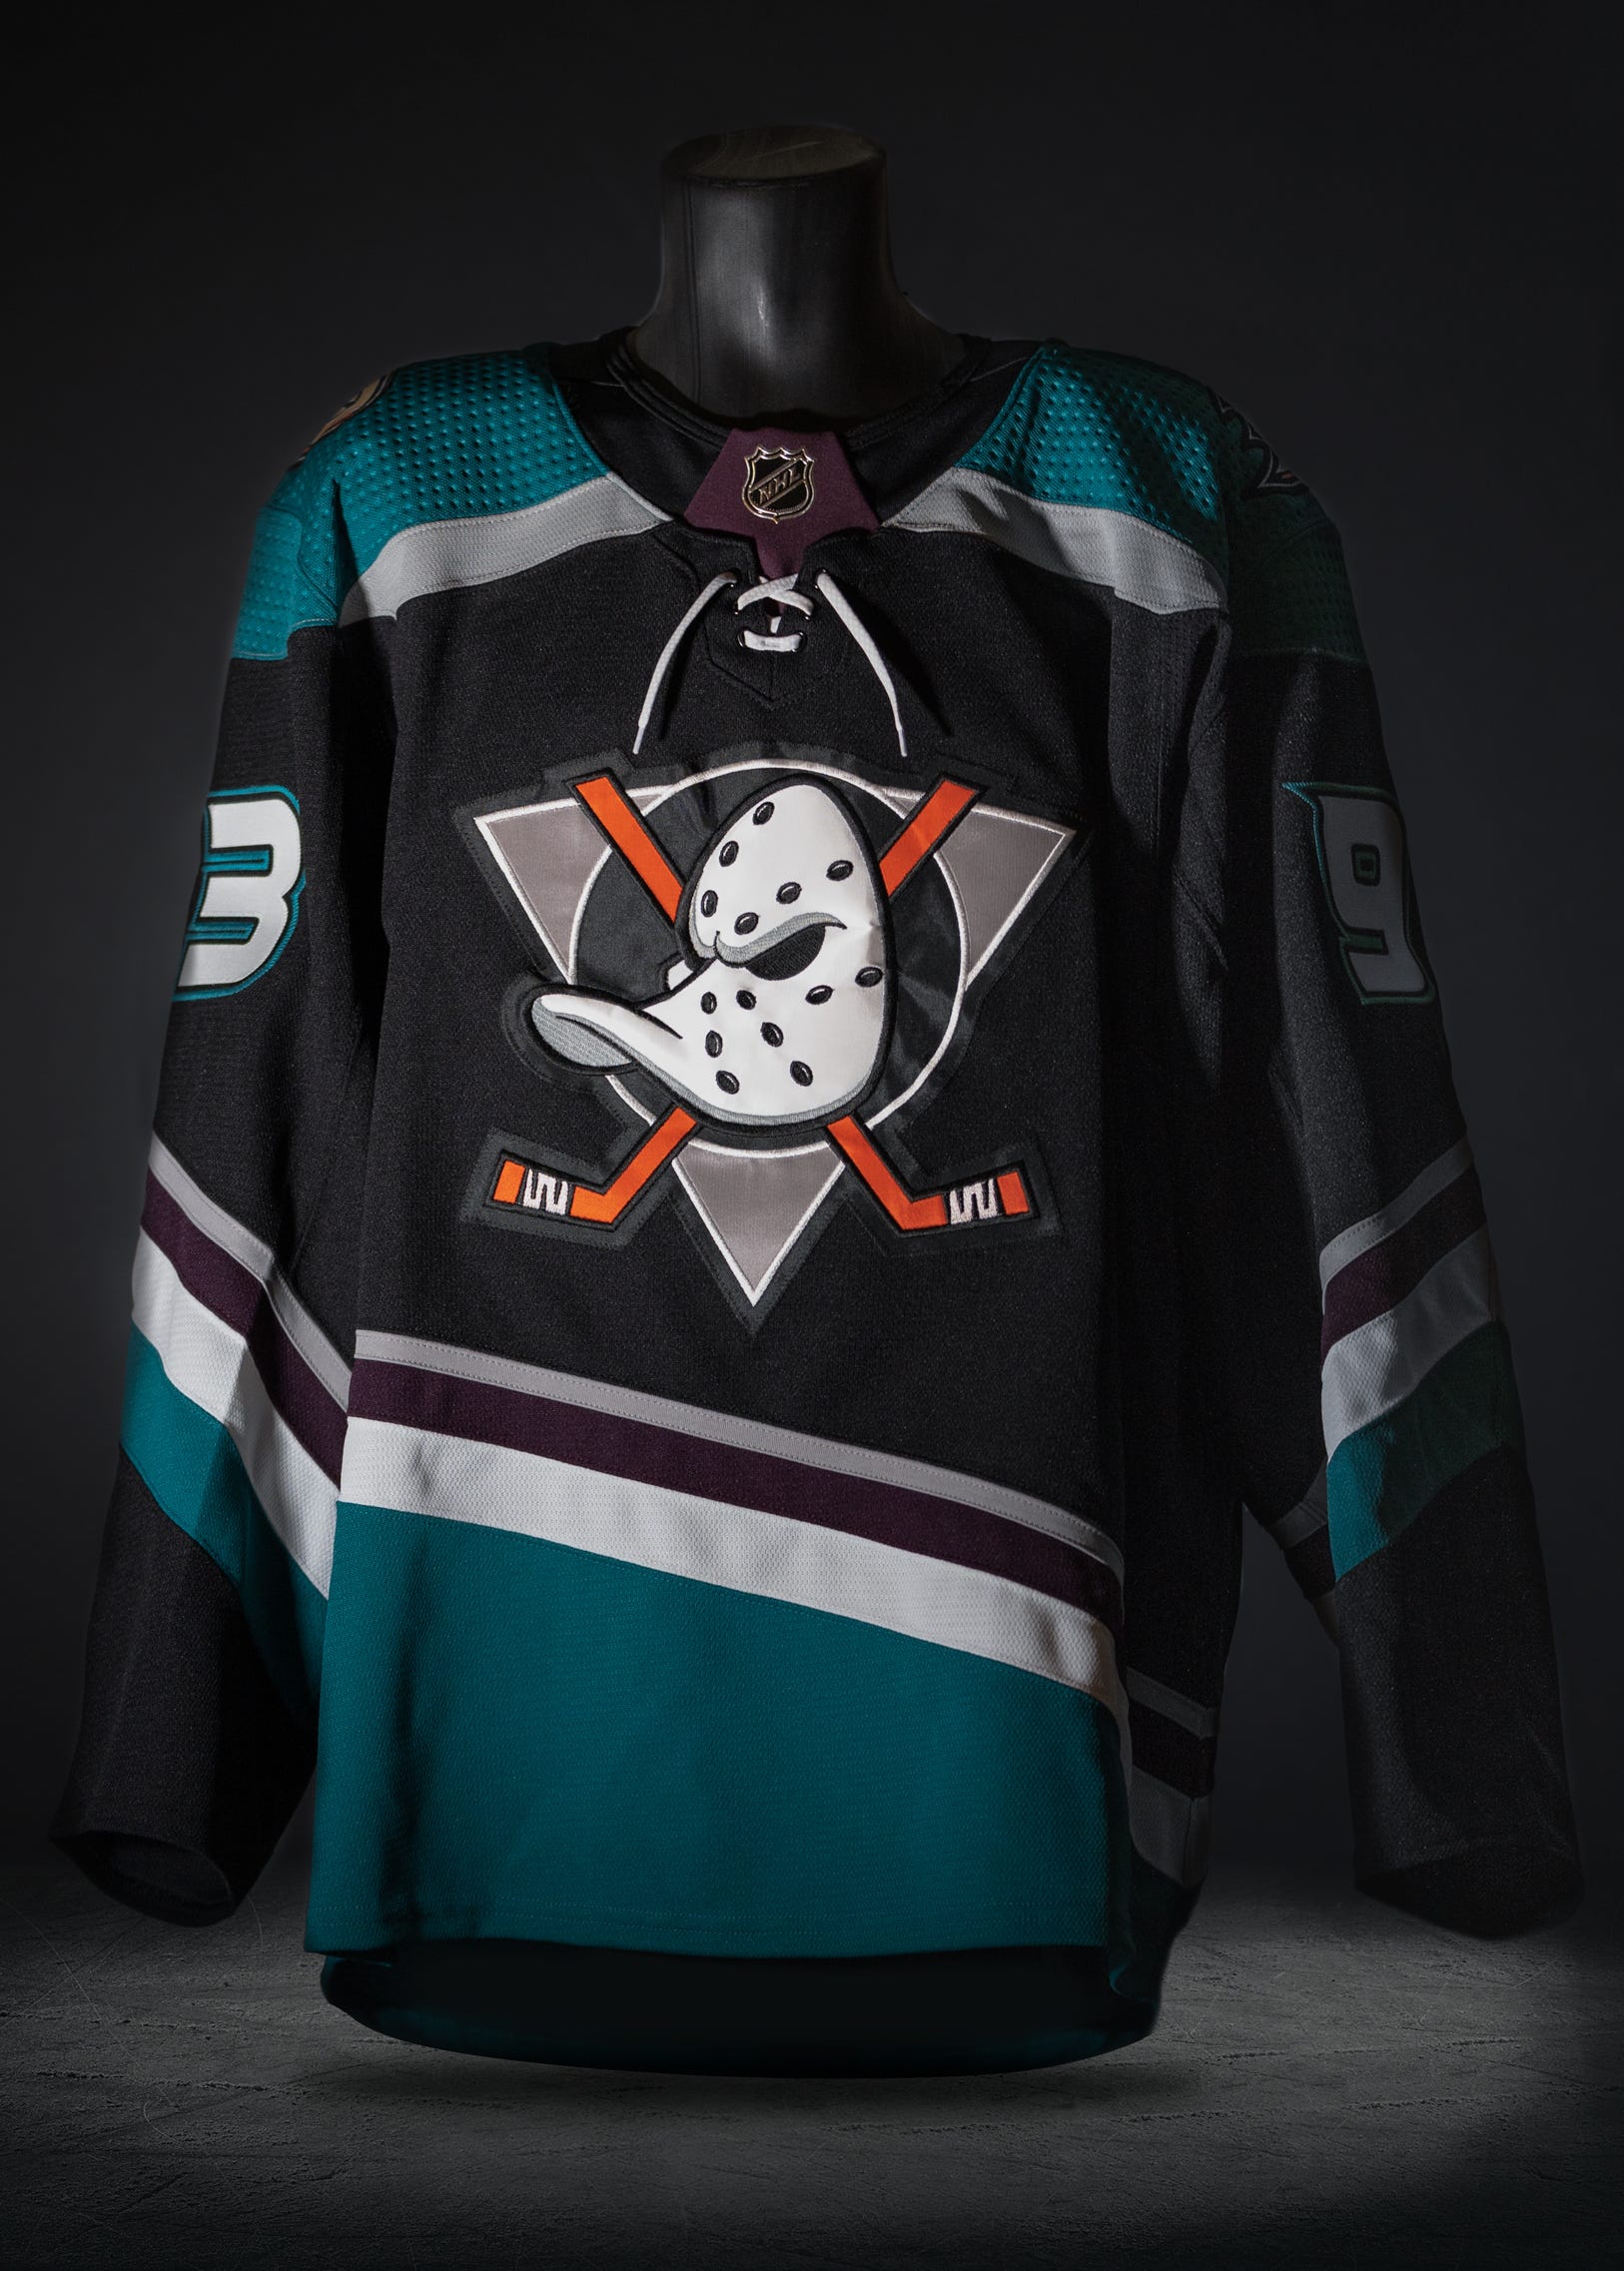 nhl jersey changes